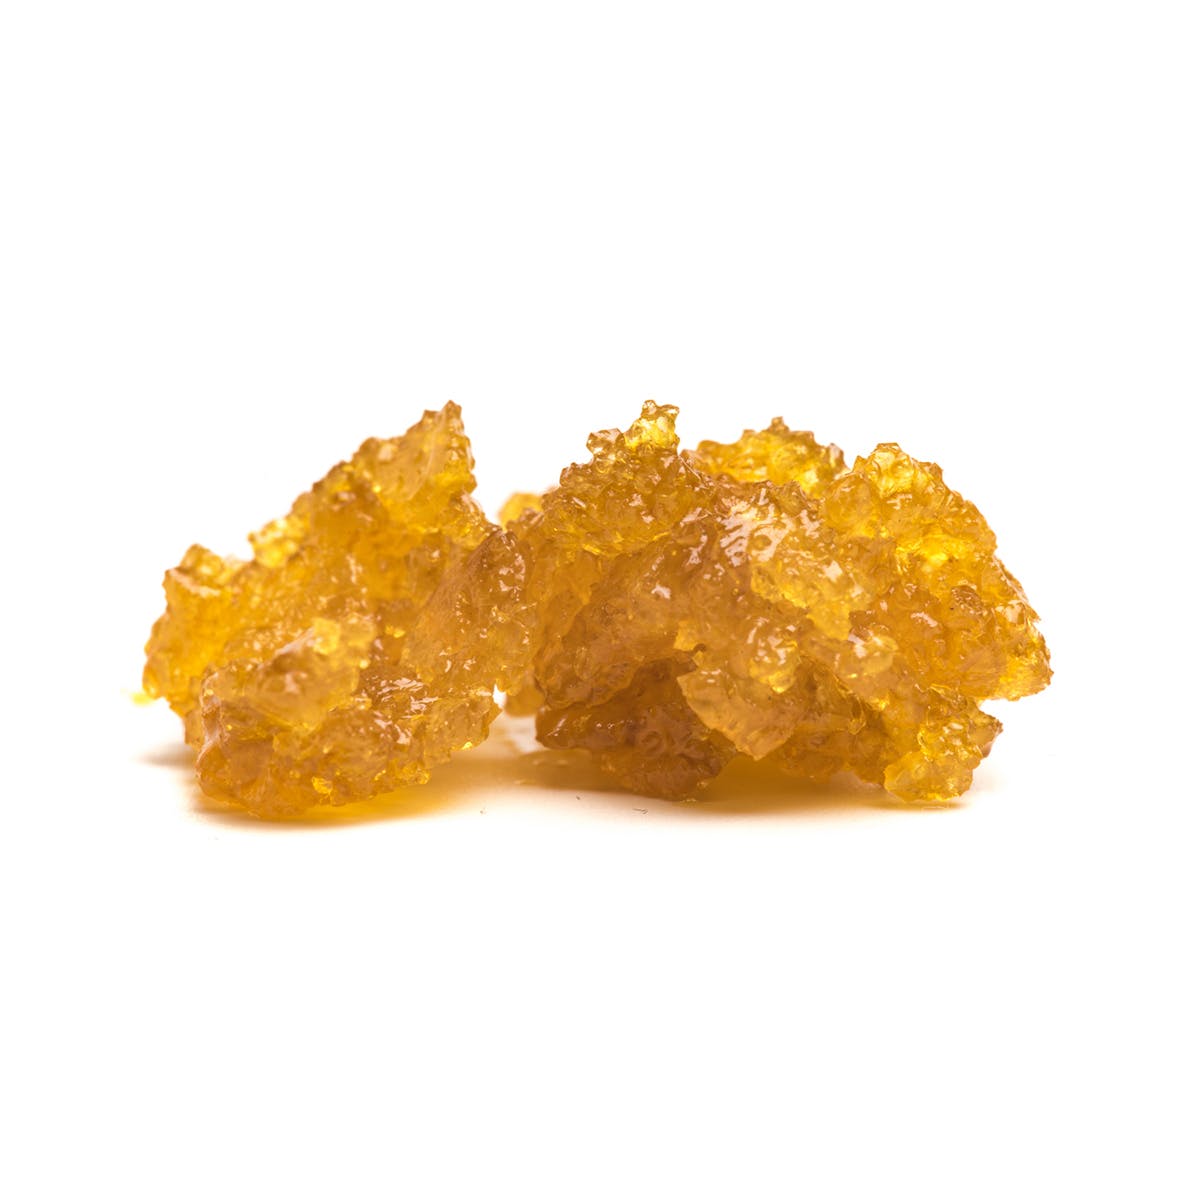 marijuana-dispensaries-cathedral-city-care-collective-north-in-cathedral-city-loudpack-live-resin-strawberry-banana